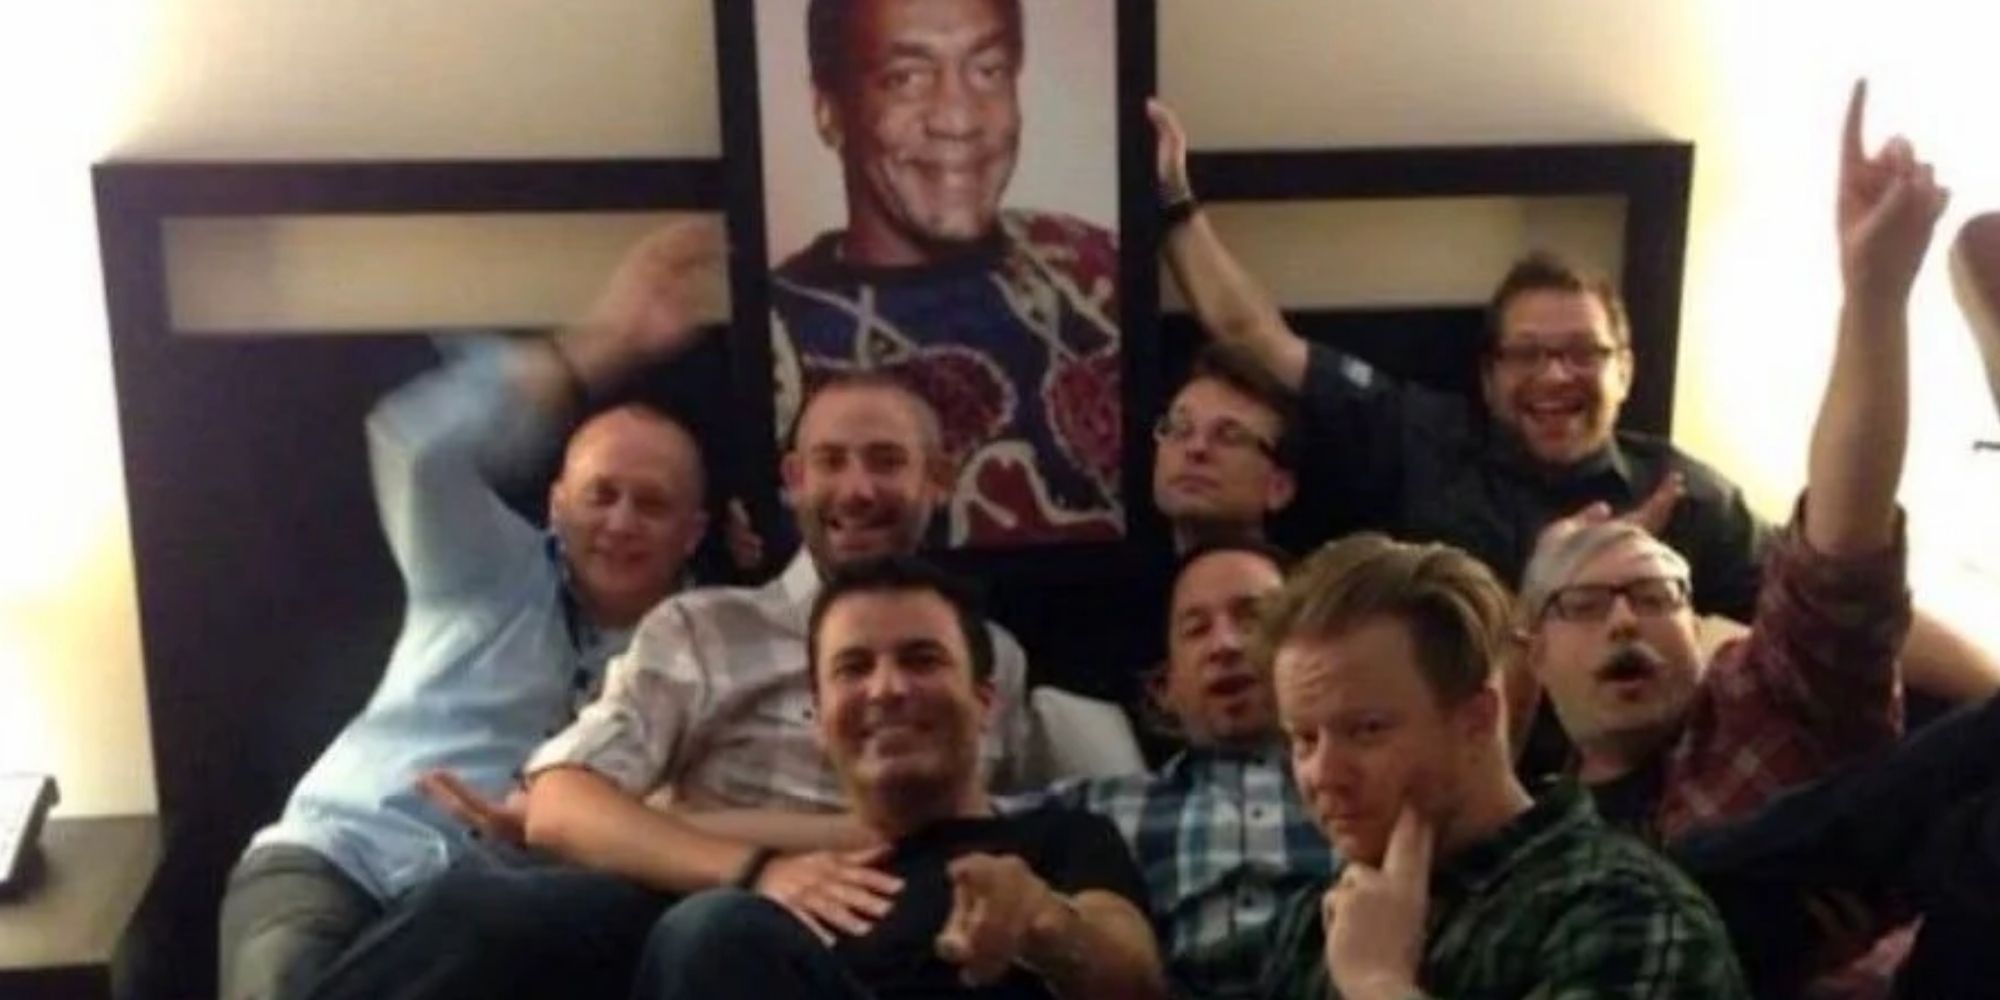 Male employees from Blizzard in front of a photo of Bill Cosby